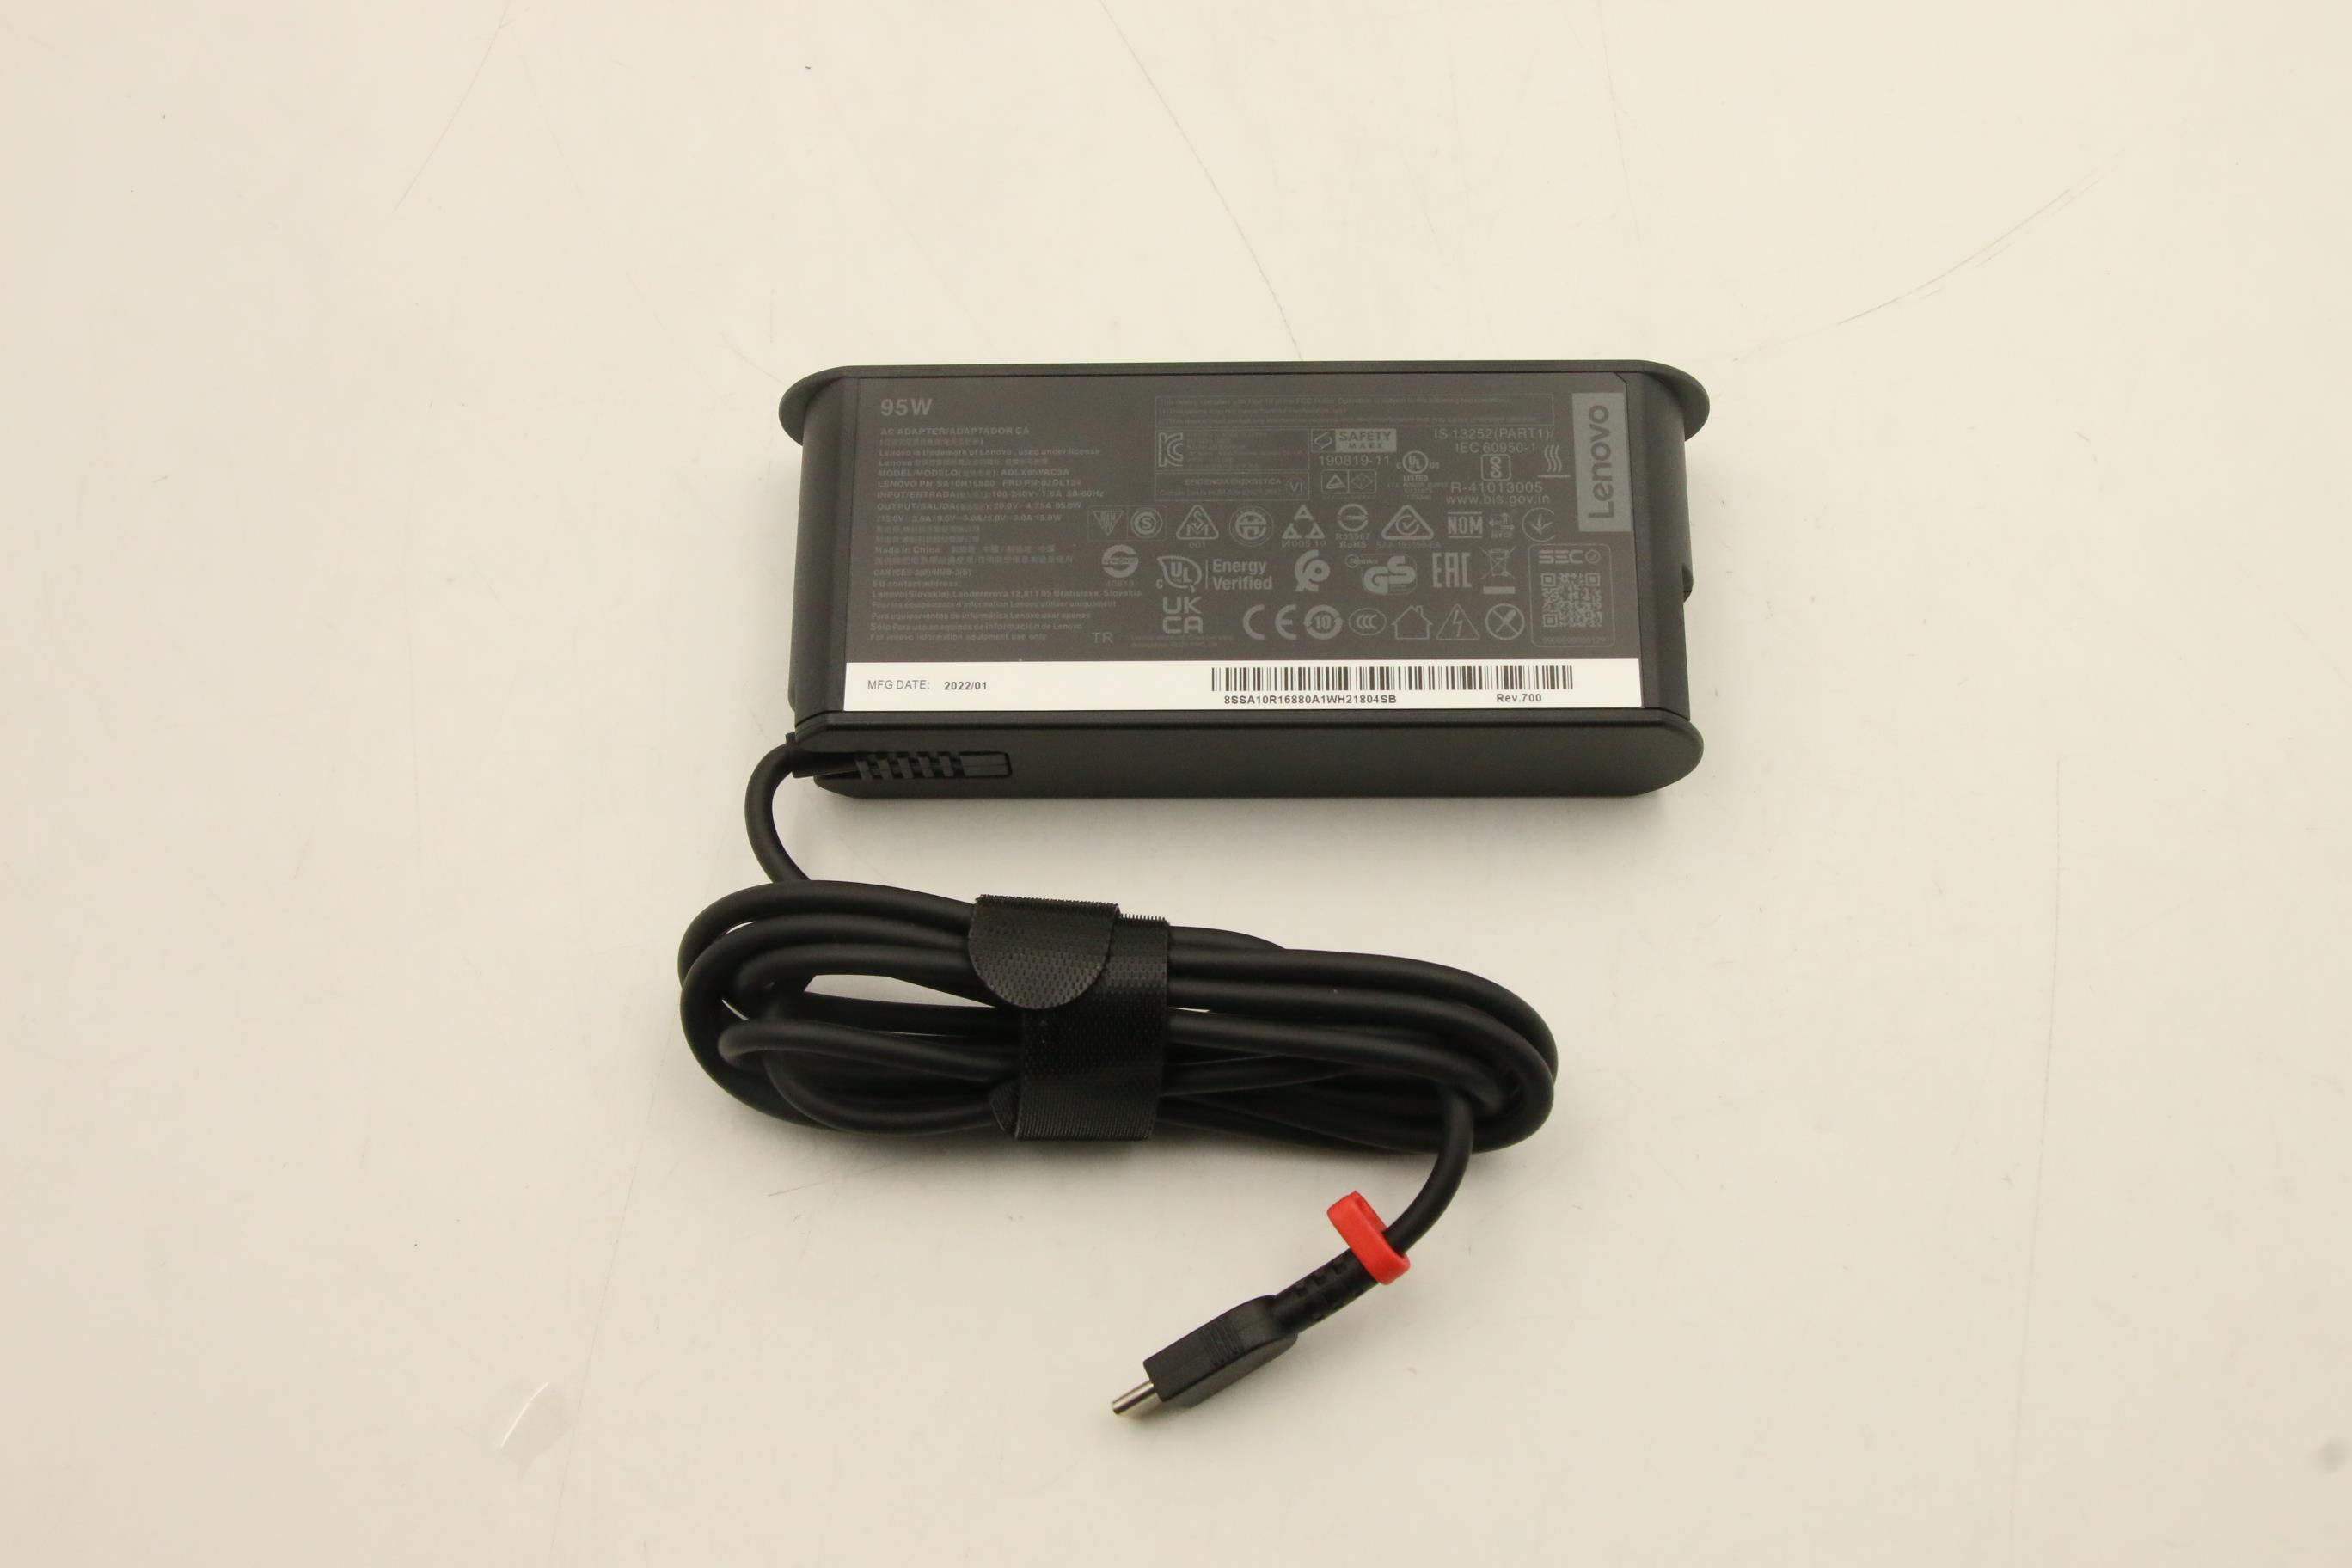 Lenovo IDEAPAD 5-15IIL05 Charger (AC Adapter) - 02DL134